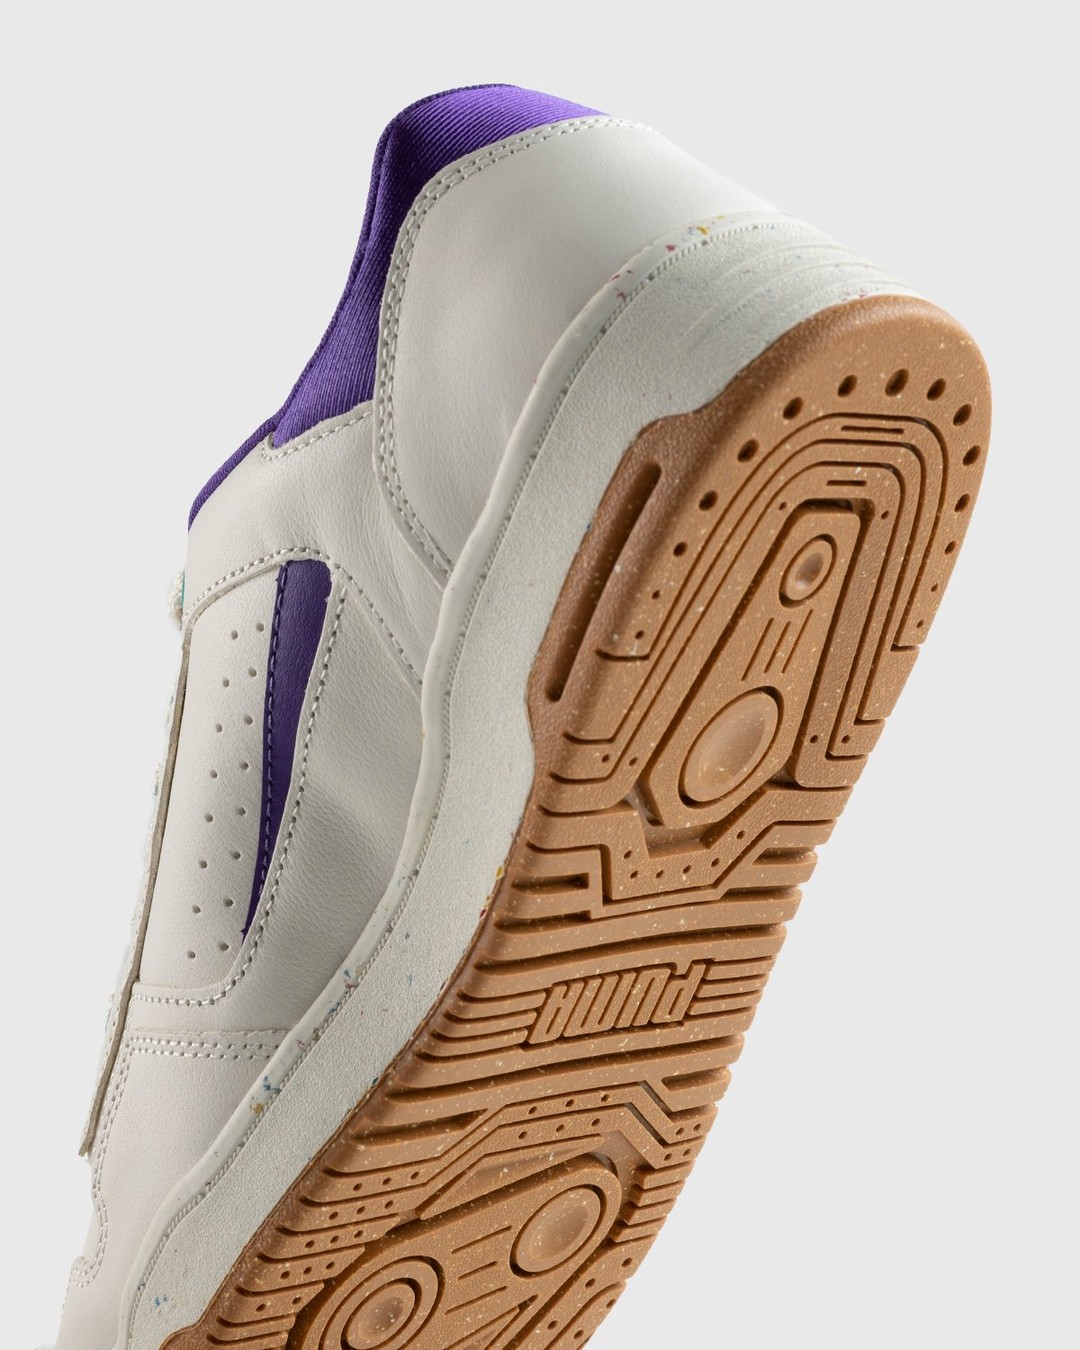 Puma x Butter Goods – Slipstream Lo Whisper White/Prism Violet/Navigate - Low Top Sneakers - Black - Image 5